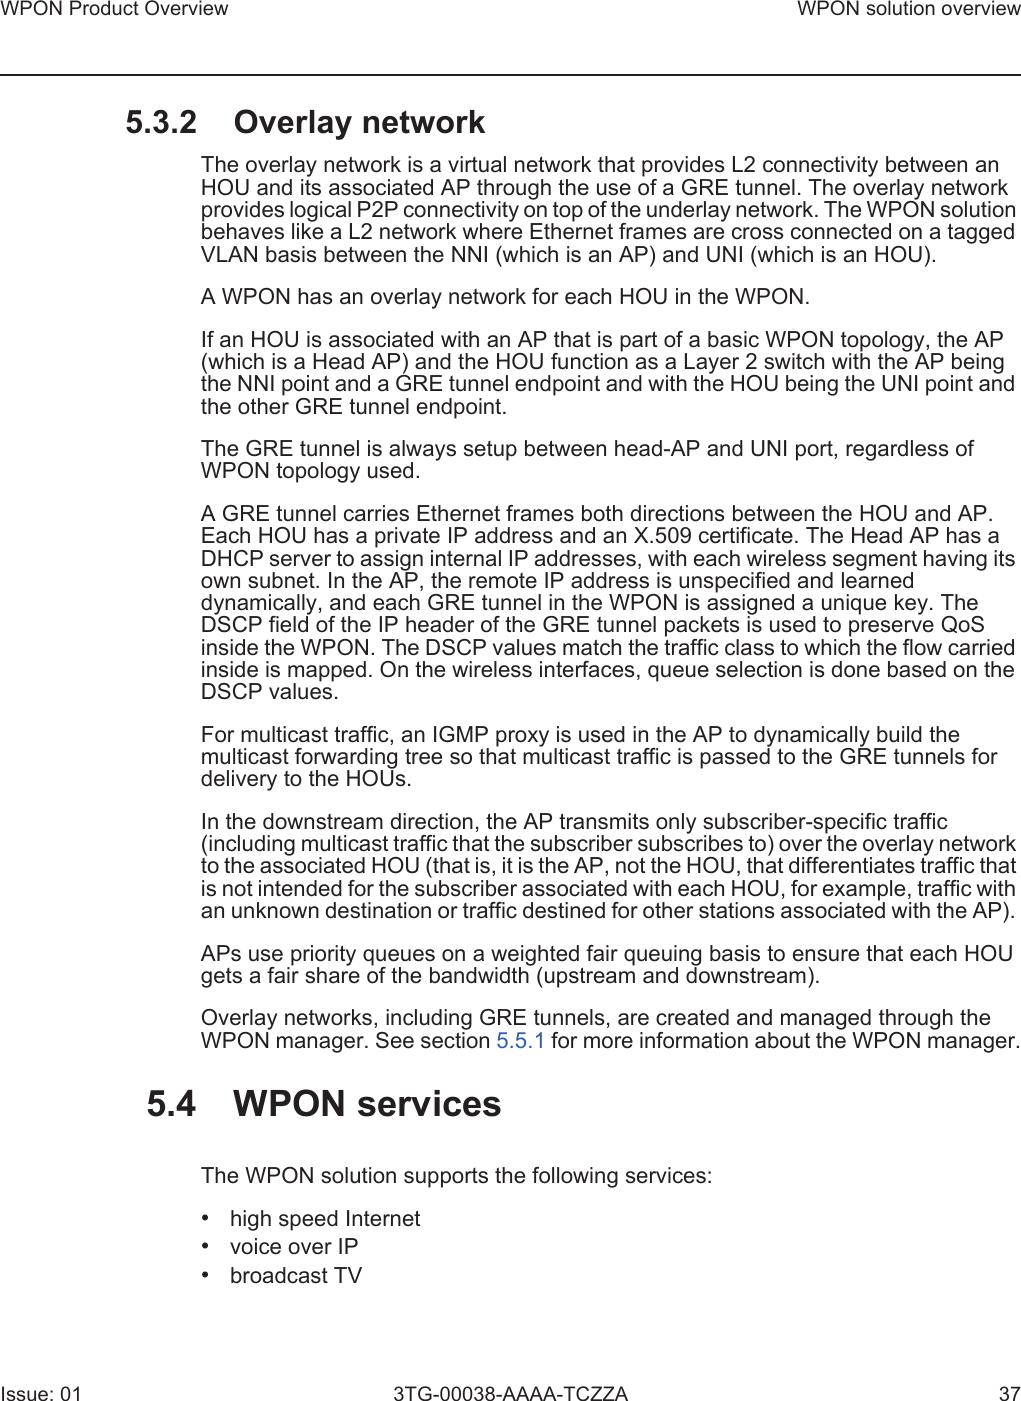 WPON Product Overview WPON solution overviewIssue: 01 3TG-00038-AAAA-TCZZA 375.3.2 Overlay networkThe overlay network is a virtual network that provides L2 connectivity between an HOU and its associated AP through the use of a GRE tunnel. The overlay network provides logical P2P connectivity on top of the underlay network. The WPON solution behaves like a L2 network where Ethernet frames are cross connected on a tagged VLAN basis between the NNI (which is an AP) and UNI (which is an HOU).A WPON has an overlay network for each HOU in the WPON.If an HOU is associated with an AP that is part of a basic WPON topology, the AP (which is a Head AP) and the HOU function as a Layer 2 switch with the AP being the NNI point and a GRE tunnel endpoint and with the HOU being the UNI point and the other GRE tunnel endpoint.The GRE tunnel is always setup between head-AP and UNI port, regardless of WPON topology used. A GRE tunnel carries Ethernet frames both directions between the HOU and AP. Each HOU has a private IP address and an X.509 certificate. The Head AP has a DHCP server to assign internal IP addresses, with each wireless segment having its own subnet. In the AP, the remote IP address is unspecified and learned dynamically, and each GRE tunnel in the WPON is assigned a unique key. The DSCP field of the IP header of the GRE tunnel packets is used to preserve QoS inside the WPON. The DSCP values match the traffic class to which the flow carried inside is mapped. On the wireless interfaces, queue selection is done based on the DSCP values.For multicast traffic, an IGMP proxy is used in the AP to dynamically build the multicast forwarding tree so that multicast traffic is passed to the GRE tunnels for delivery to the HOUs.In the downstream direction, the AP transmits only subscriber-specific traffic (including multicast traffic that the subscriber subscribes to) over the overlay network to the associated HOU (that is, it is the AP, not the HOU, that differentiates traffic that is not intended for the subscriber associated with each HOU, for example, traffic with an unknown destination or traffic destined for other stations associated with the AP). APs use priority queues on a weighted fair queuing basis to ensure that each HOU gets a fair share of the bandwidth (upstream and downstream).Overlay networks, including GRE tunnels, are created and managed through the WPON manager. See section 5.5.1 for more information about the WPON manager.5.4 WPON servicesThe WPON solution supports the following services:•high speed Internet•voice over IP•broadcast TV